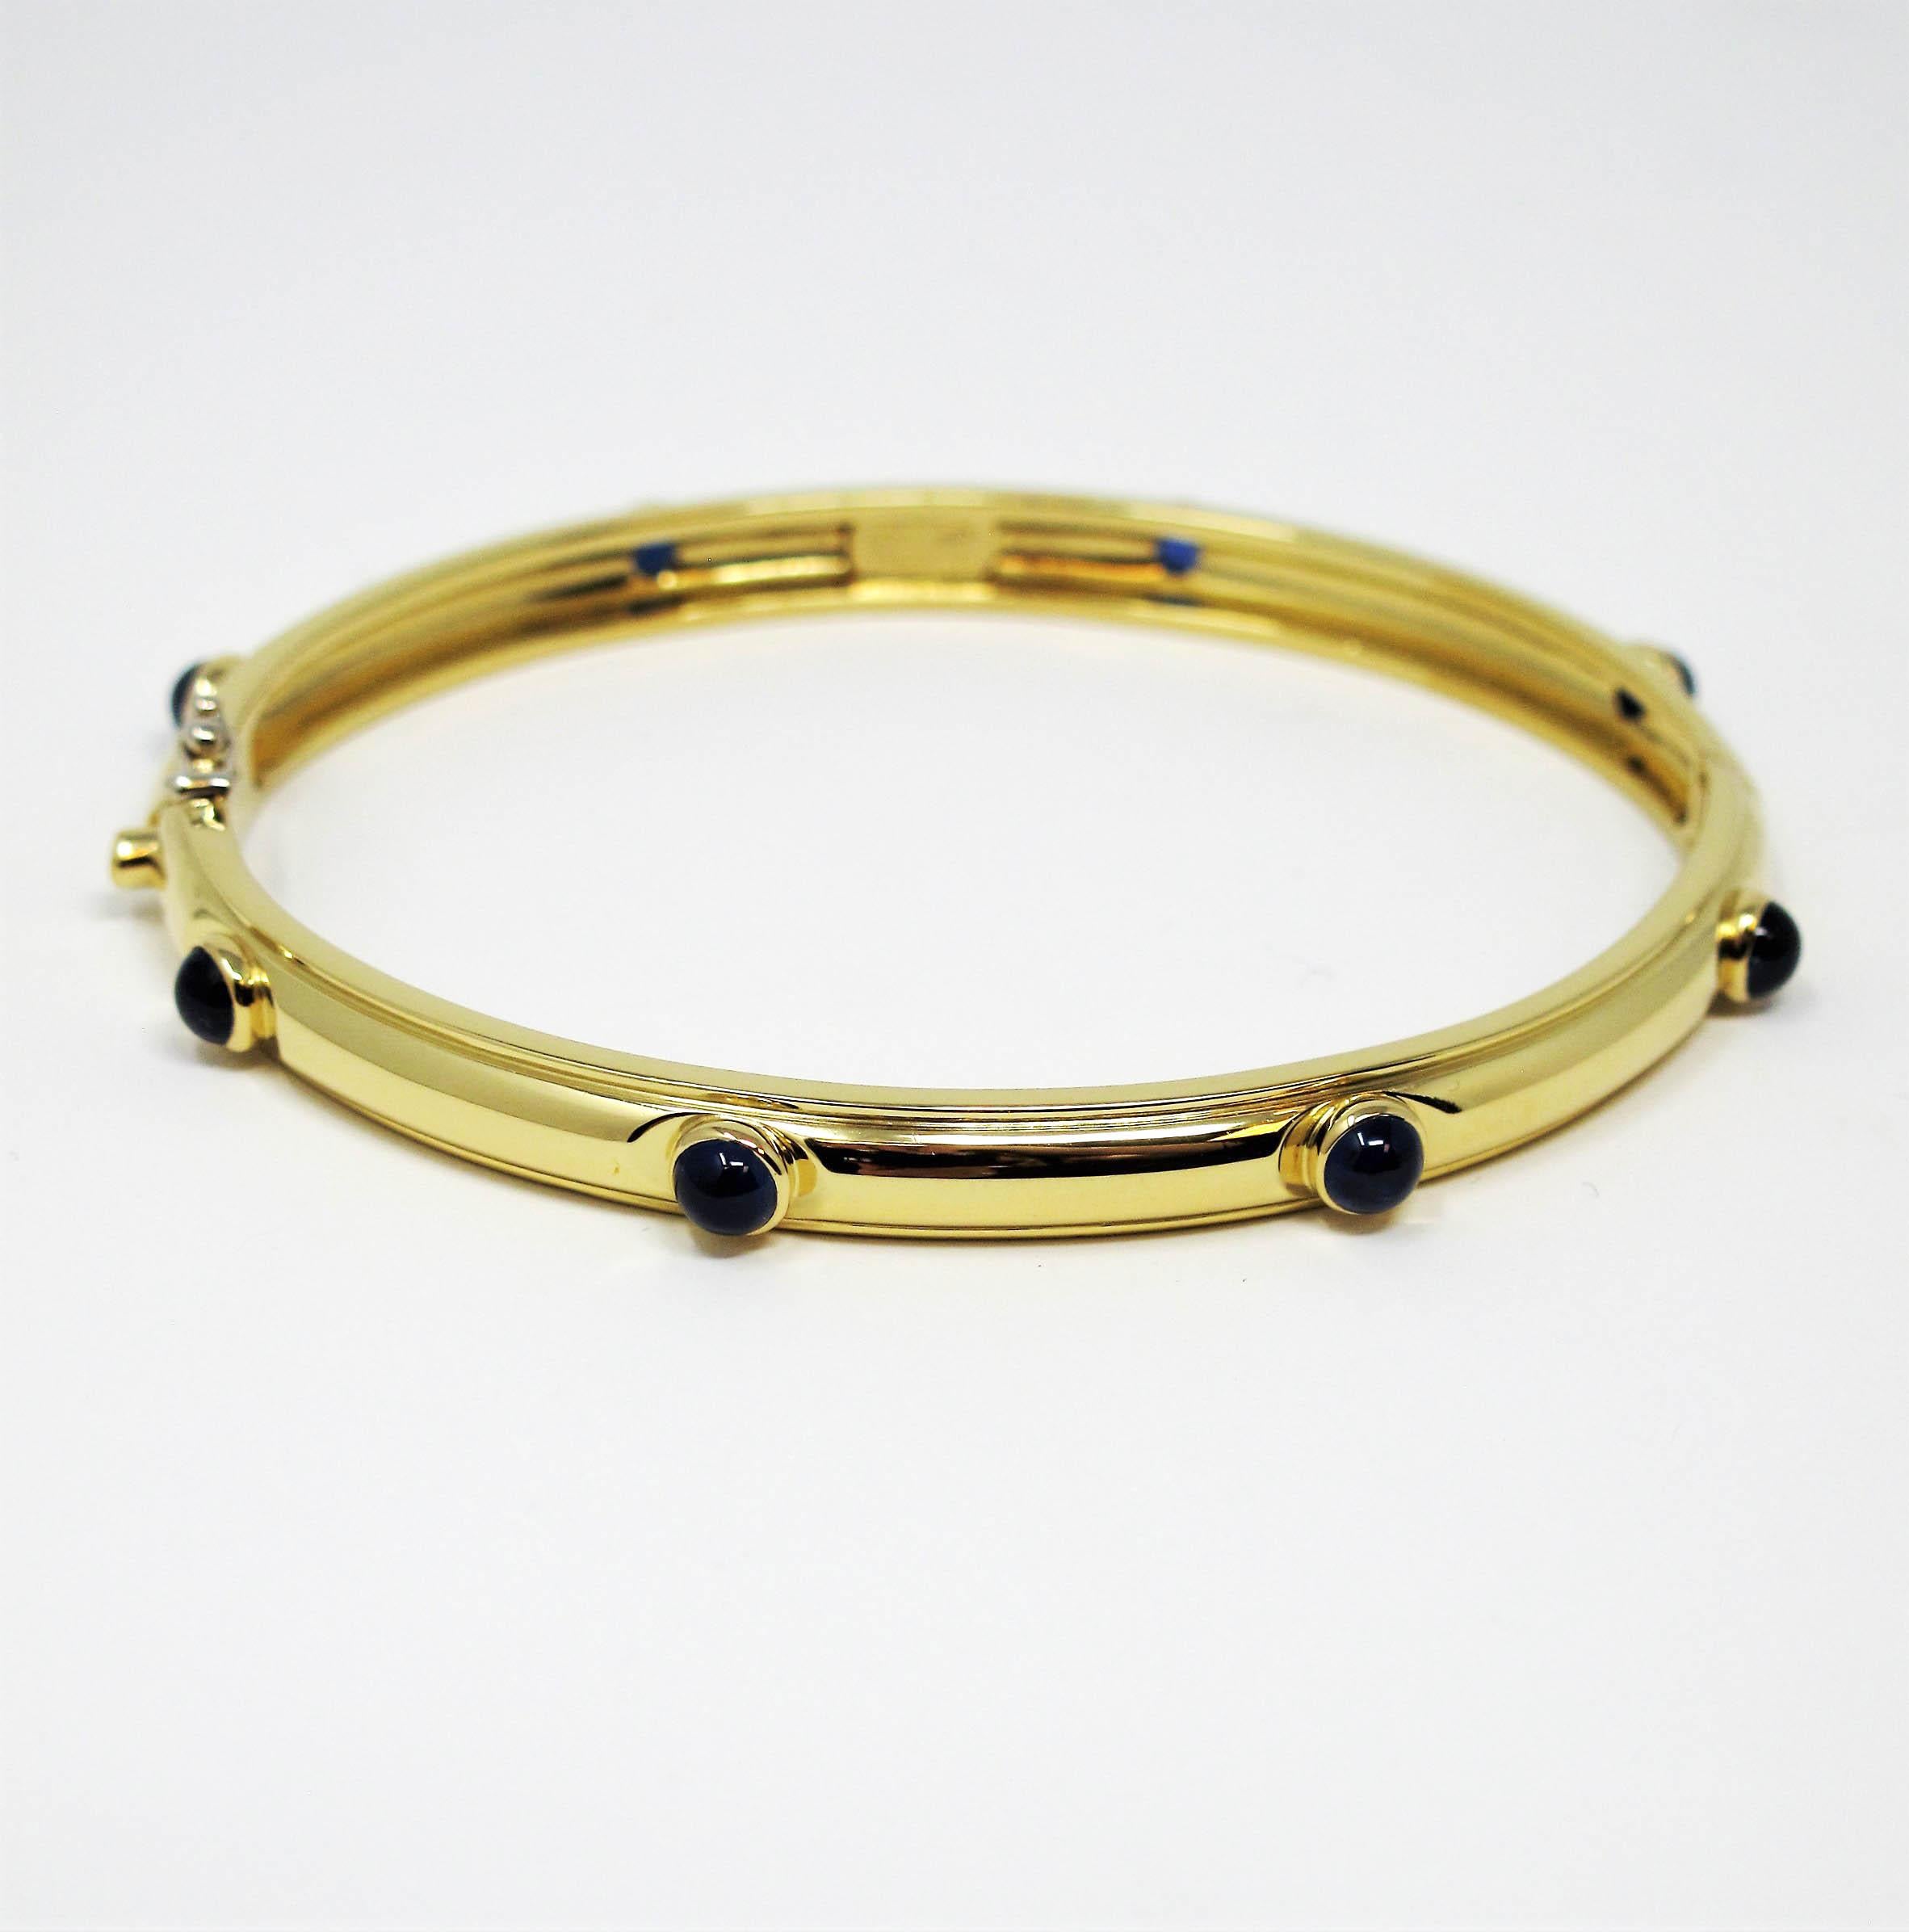 Gorgeous sapphire station bangle bracelet from Tiffany & Co. This simple, yet effortlessly timeless piece makes a chic statement on the wrist. With its clean lines, perfect symmetry, and flawless elegance, this bracelet will remain one of your